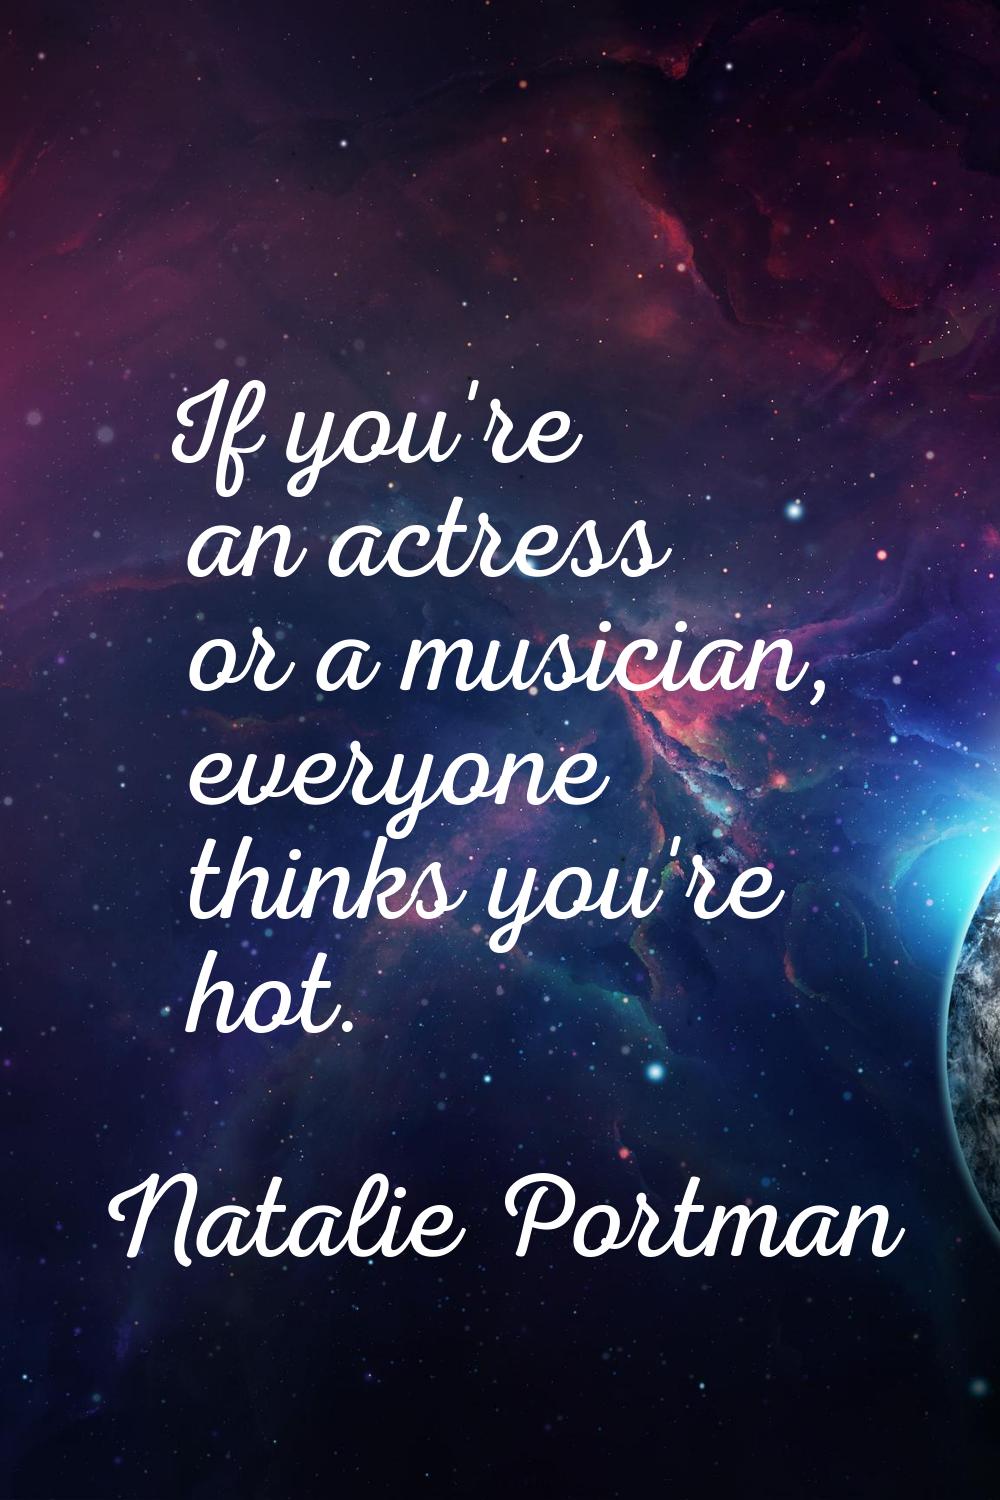 If you're an actress or a musician, everyone thinks you're hot.